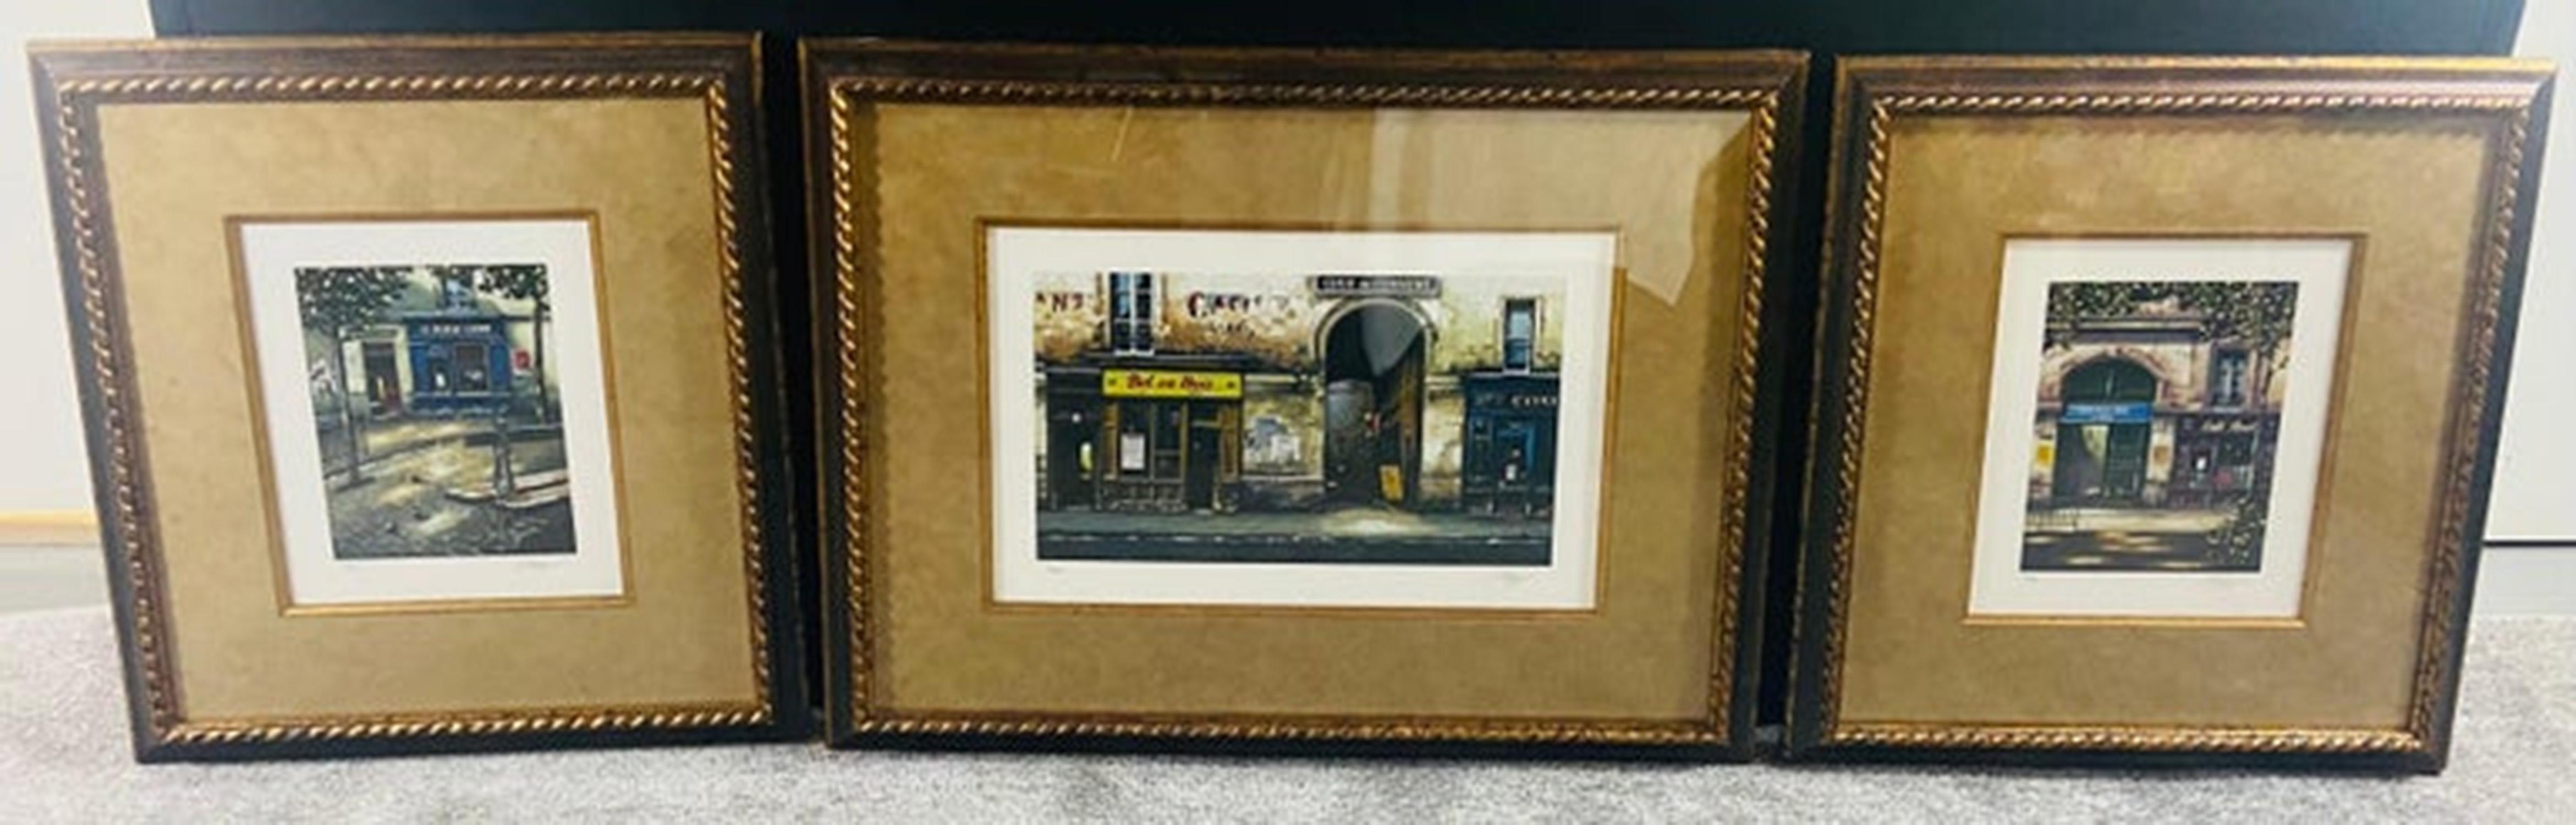 A set of three beautiful framed and matted prints depicting scenes of the street of Paris. Full of life and creativity, the streets of the city of lights seduce us with its artisan shops and colorful business signs and glamorous cafes and bistros.